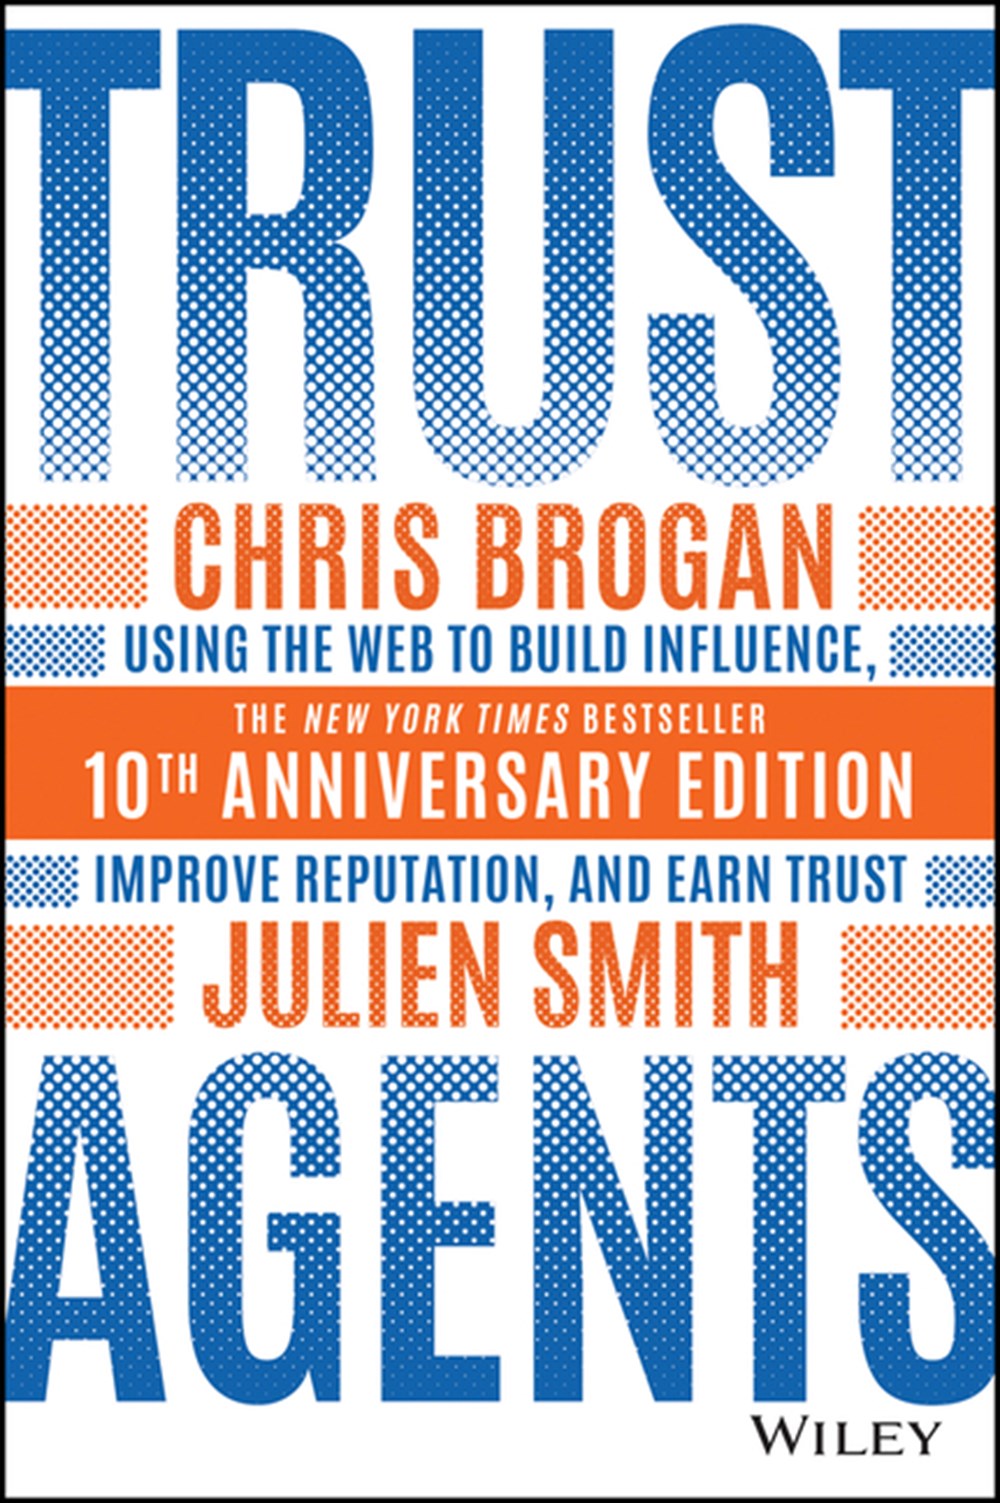 Trust Agents Using the Web to Build Influence, Improve Reputation, and Earn Trust